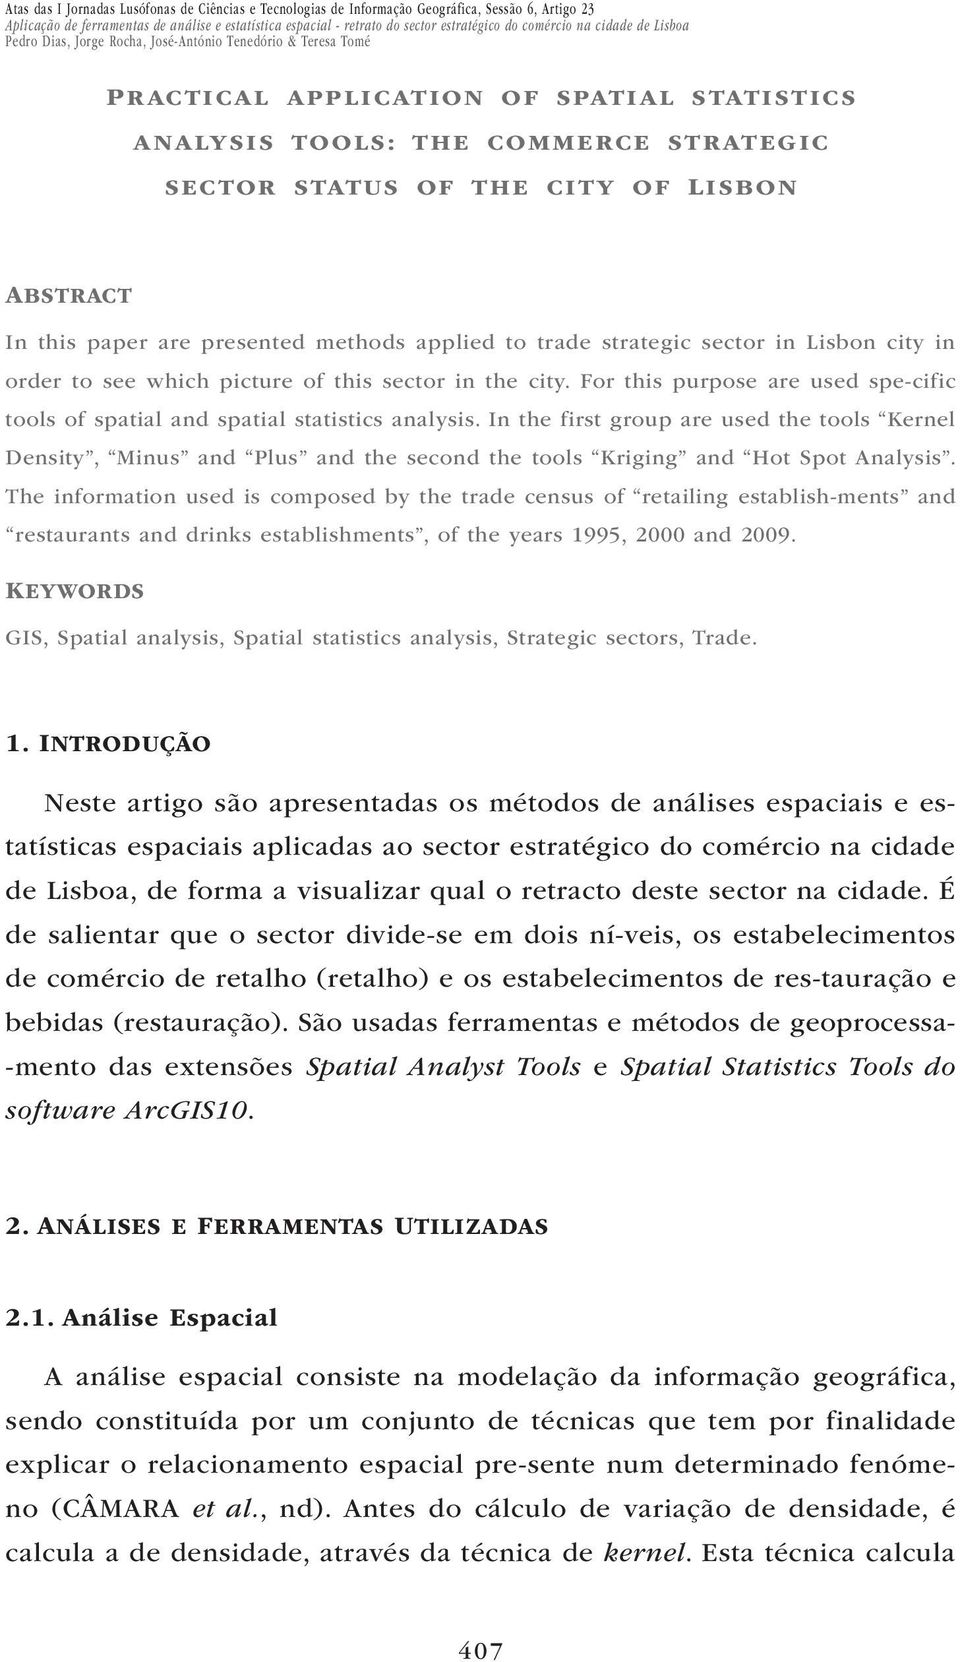 For this purpose are used spe-cific tools of spatial and spatial statistics analysis.